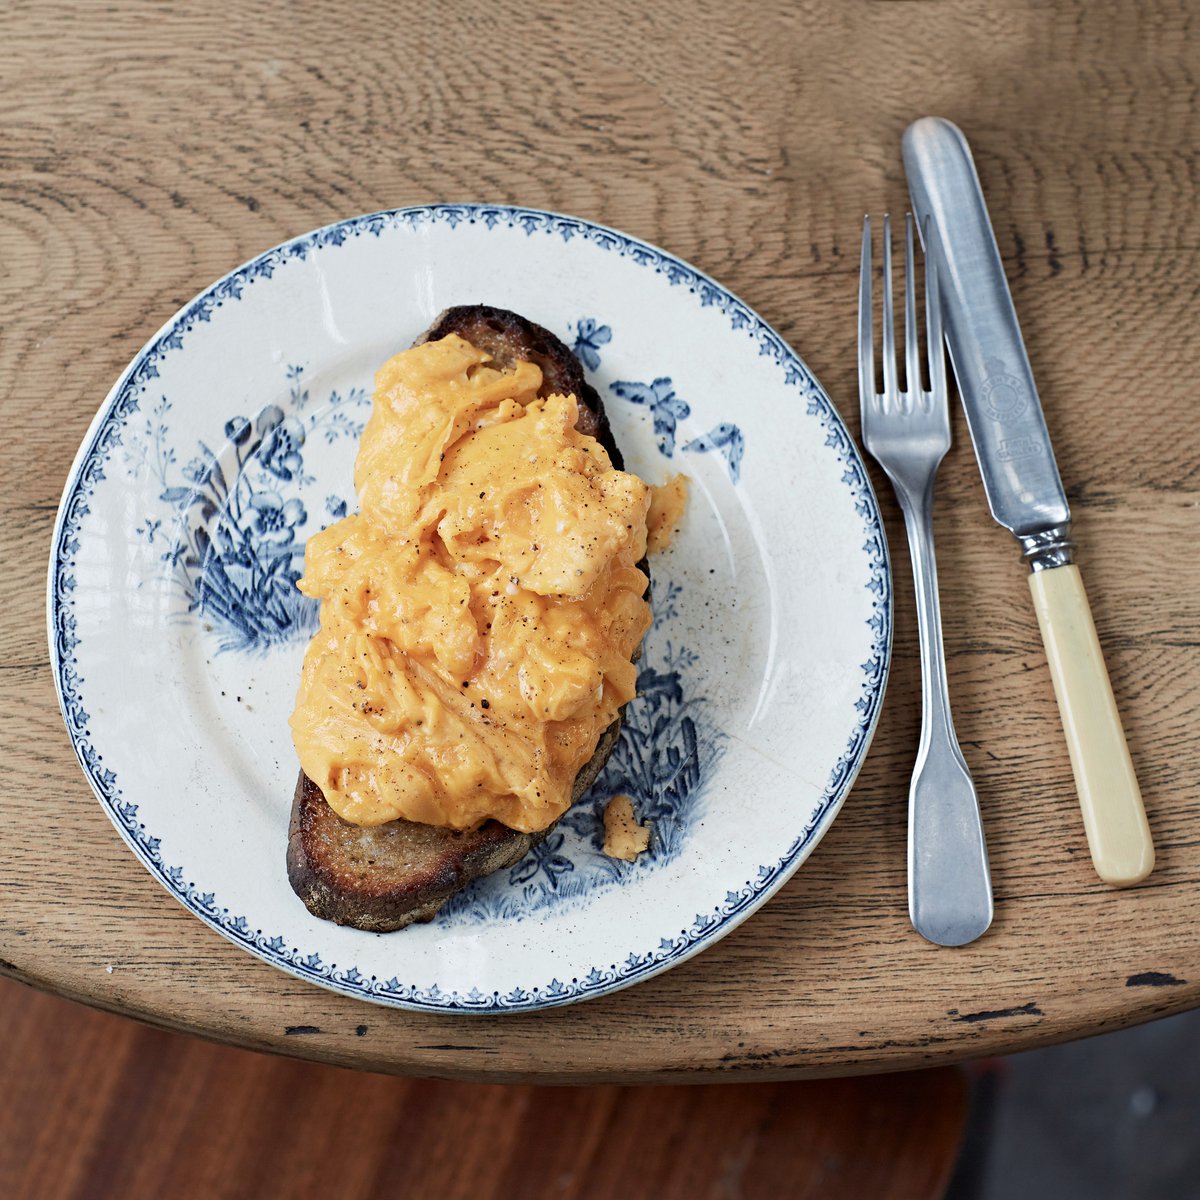 For those of you asking about scrambled eggs - we've got your back! https://t.co/1opgz4UOTW https://t.co/xMtcX2cwNe